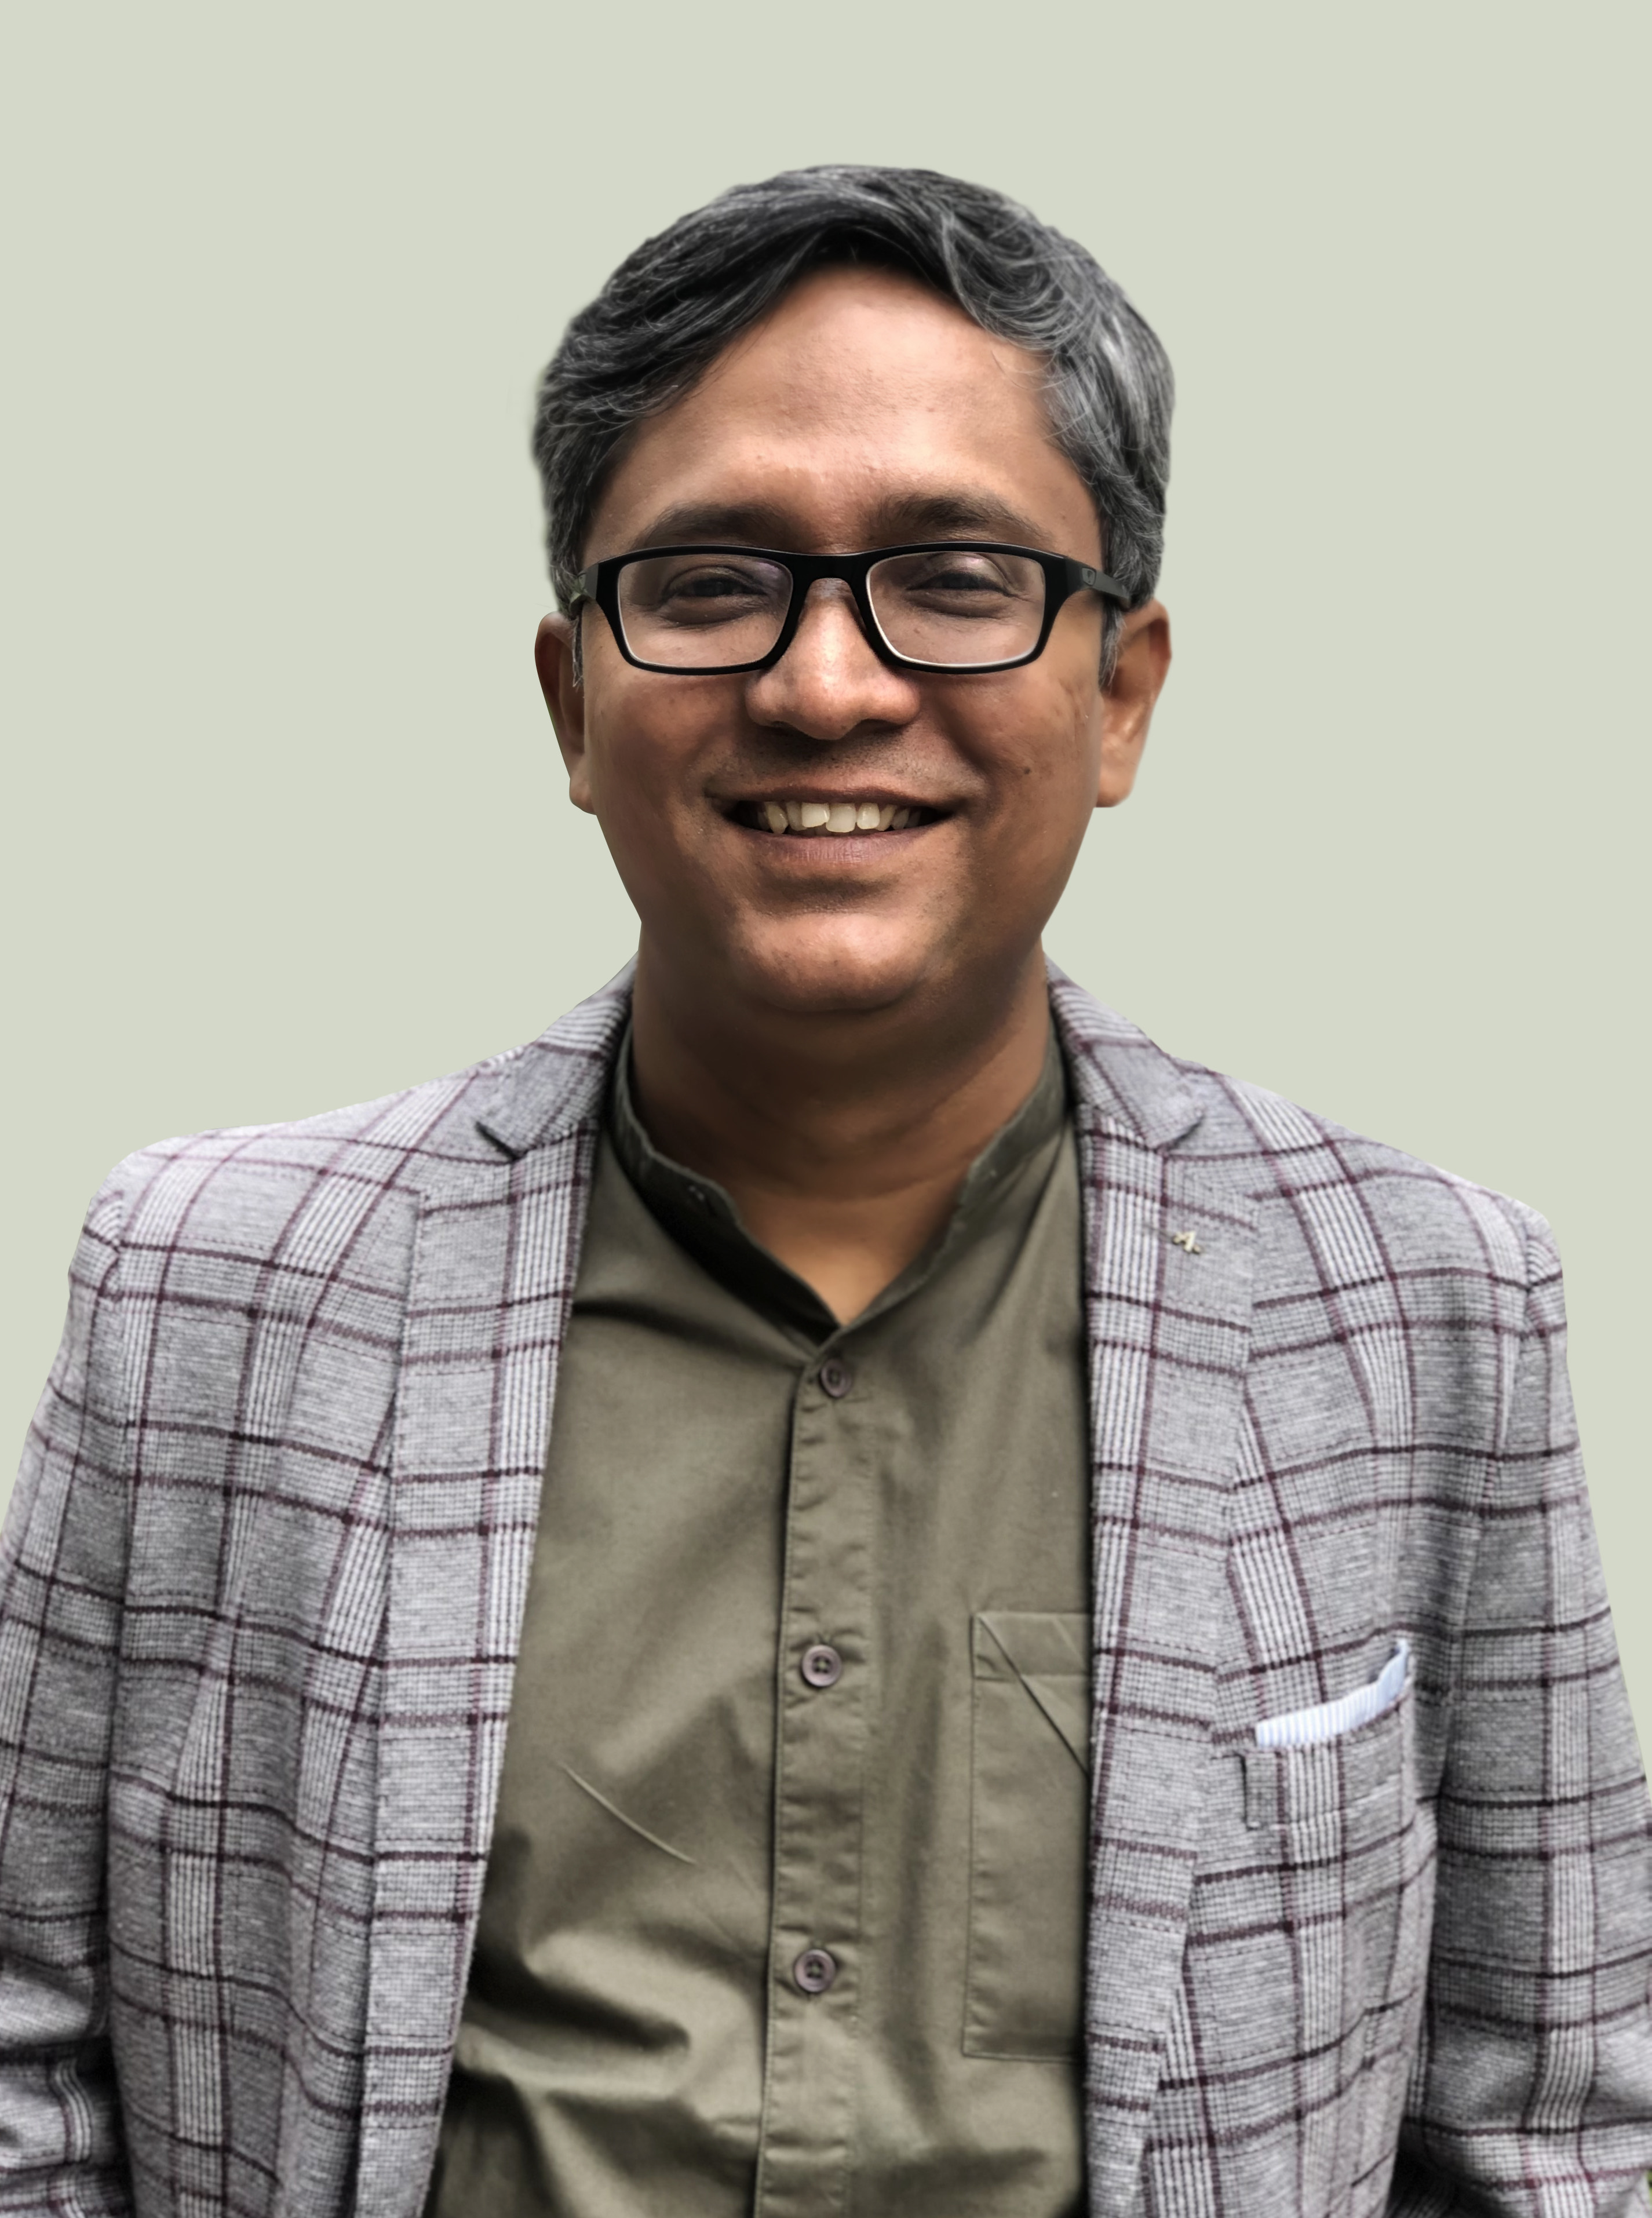 Navonil Chatterjee, <span>Jt. President & Chief Strategy Officer <br> Rediffusion</span>